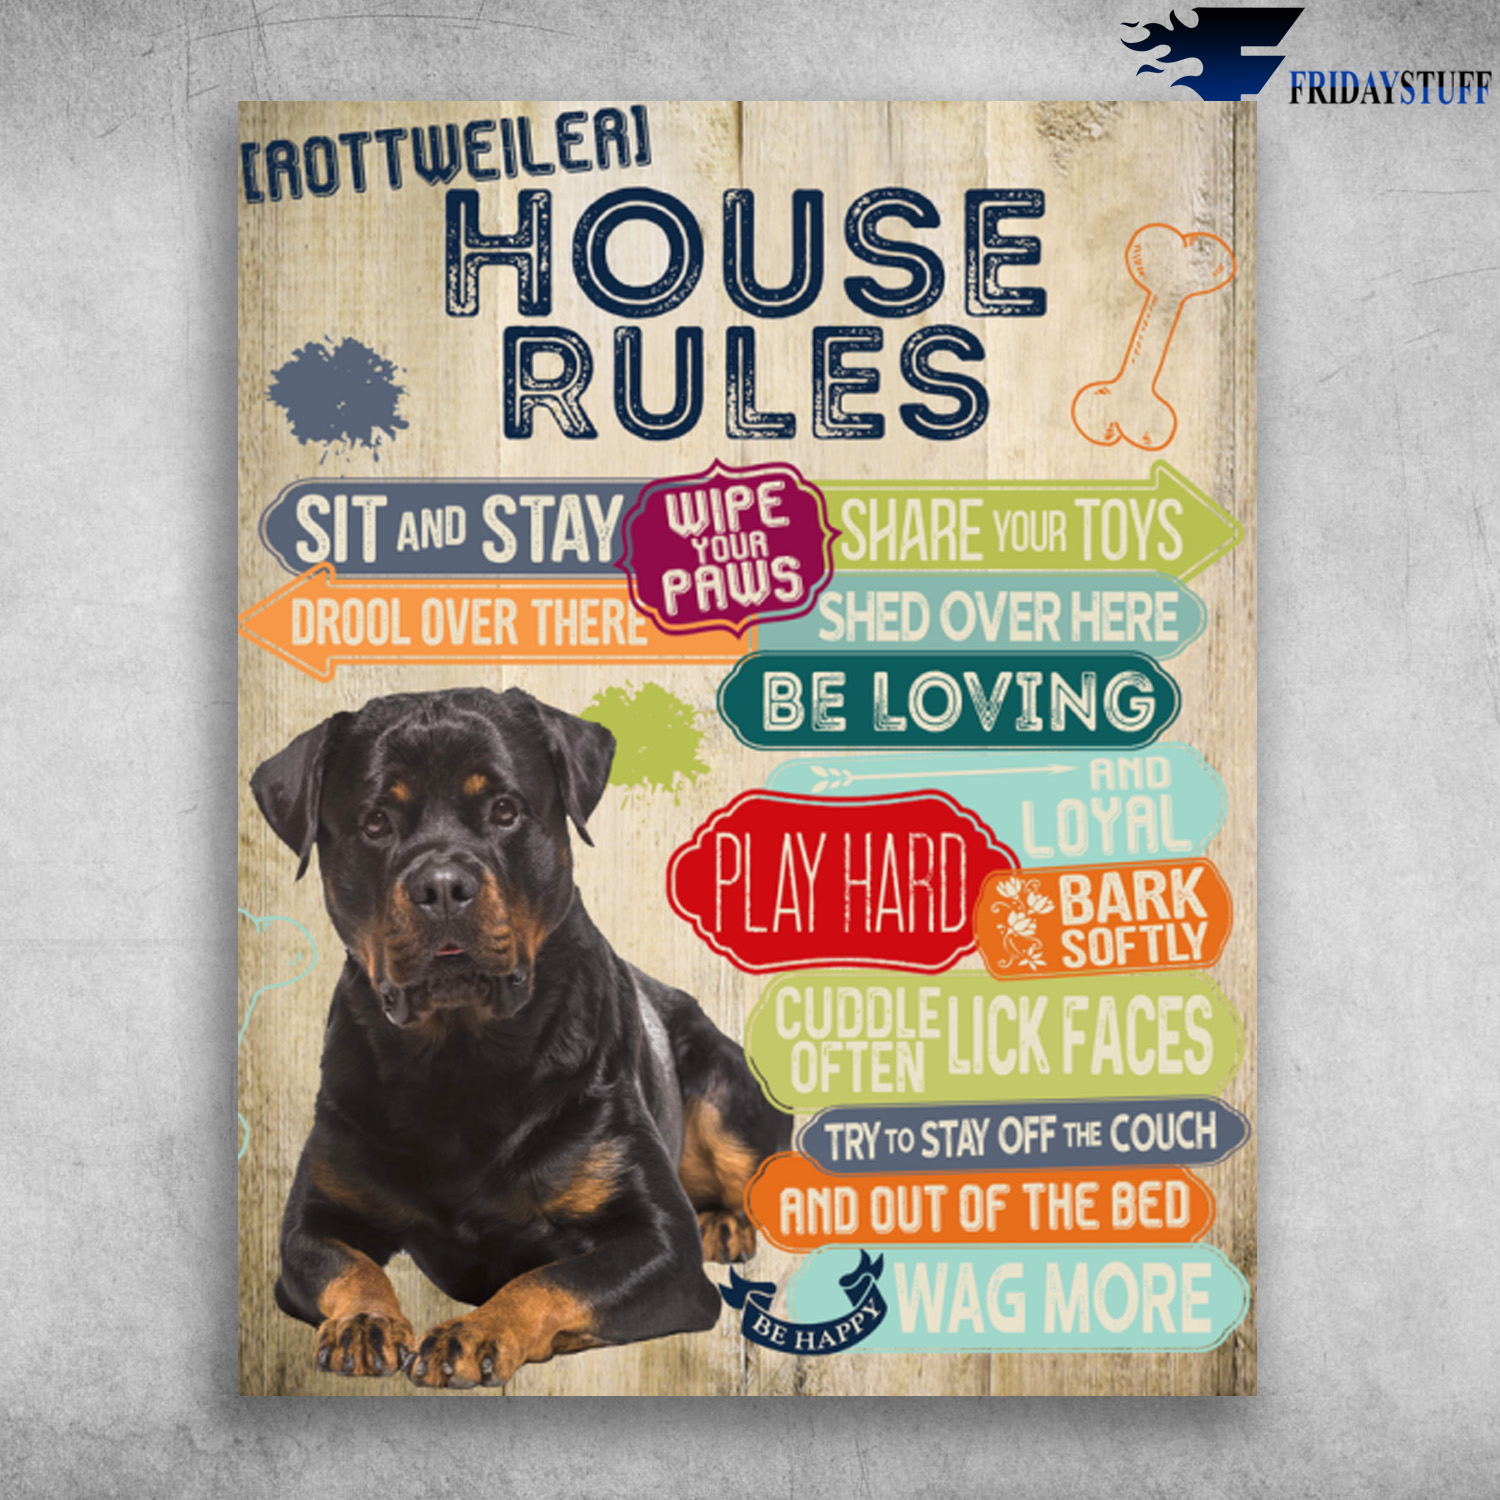 Rottweiler Dog House Rules Sit And Stay Wipe Your Paws